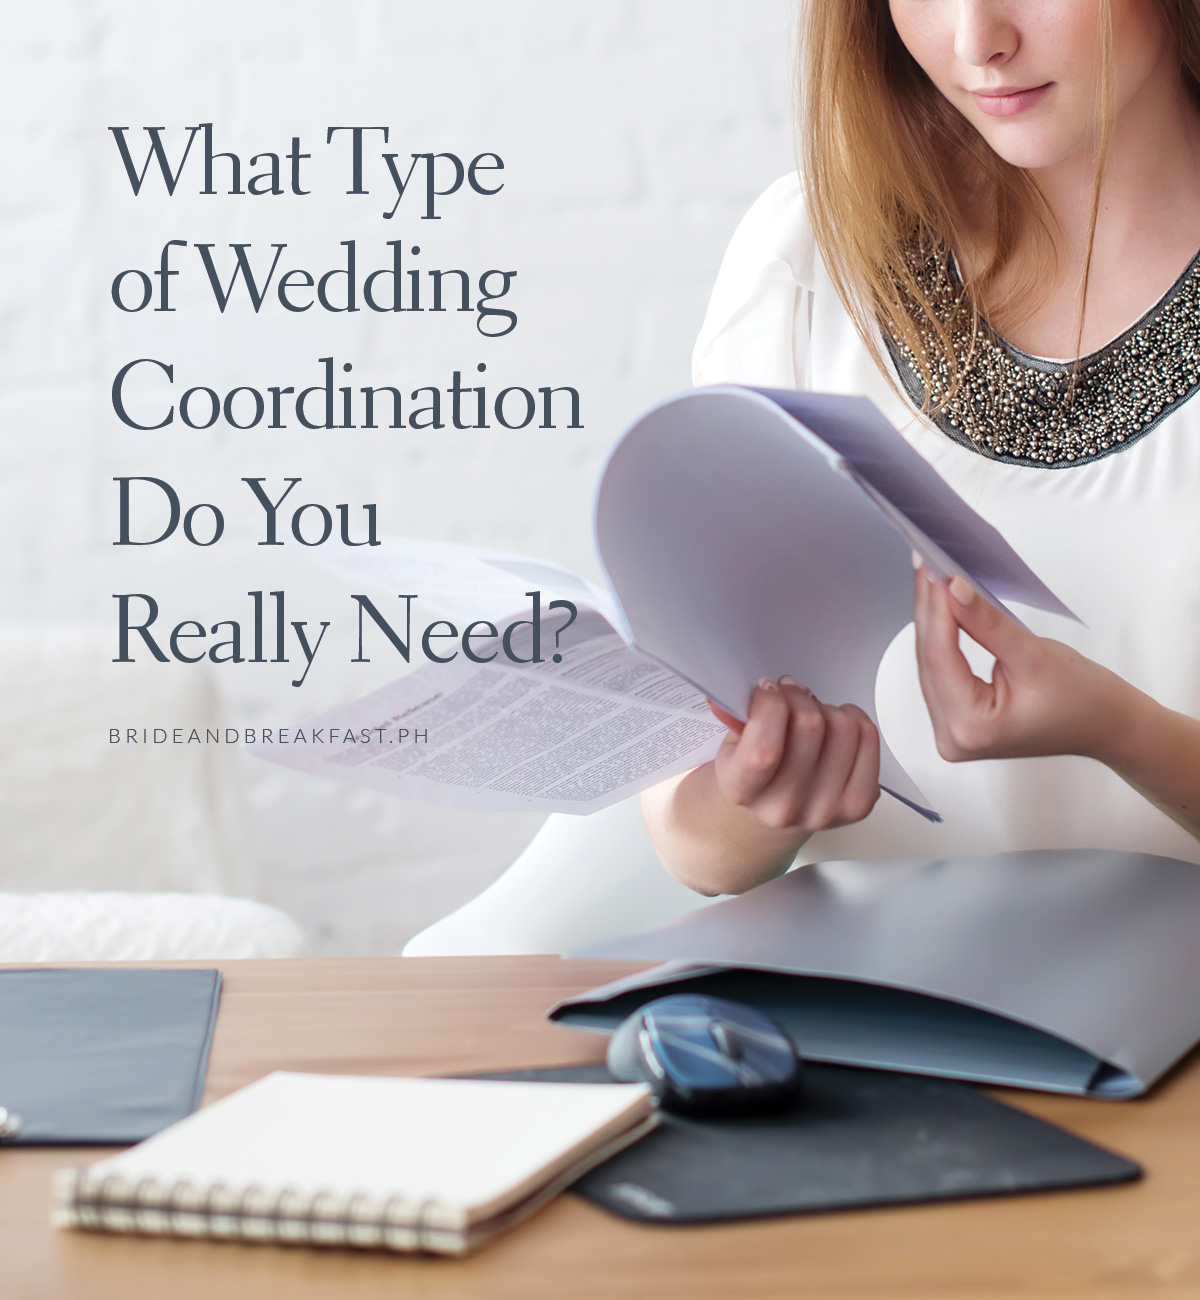 What Type of Wedding Coordination Do You Really Need?